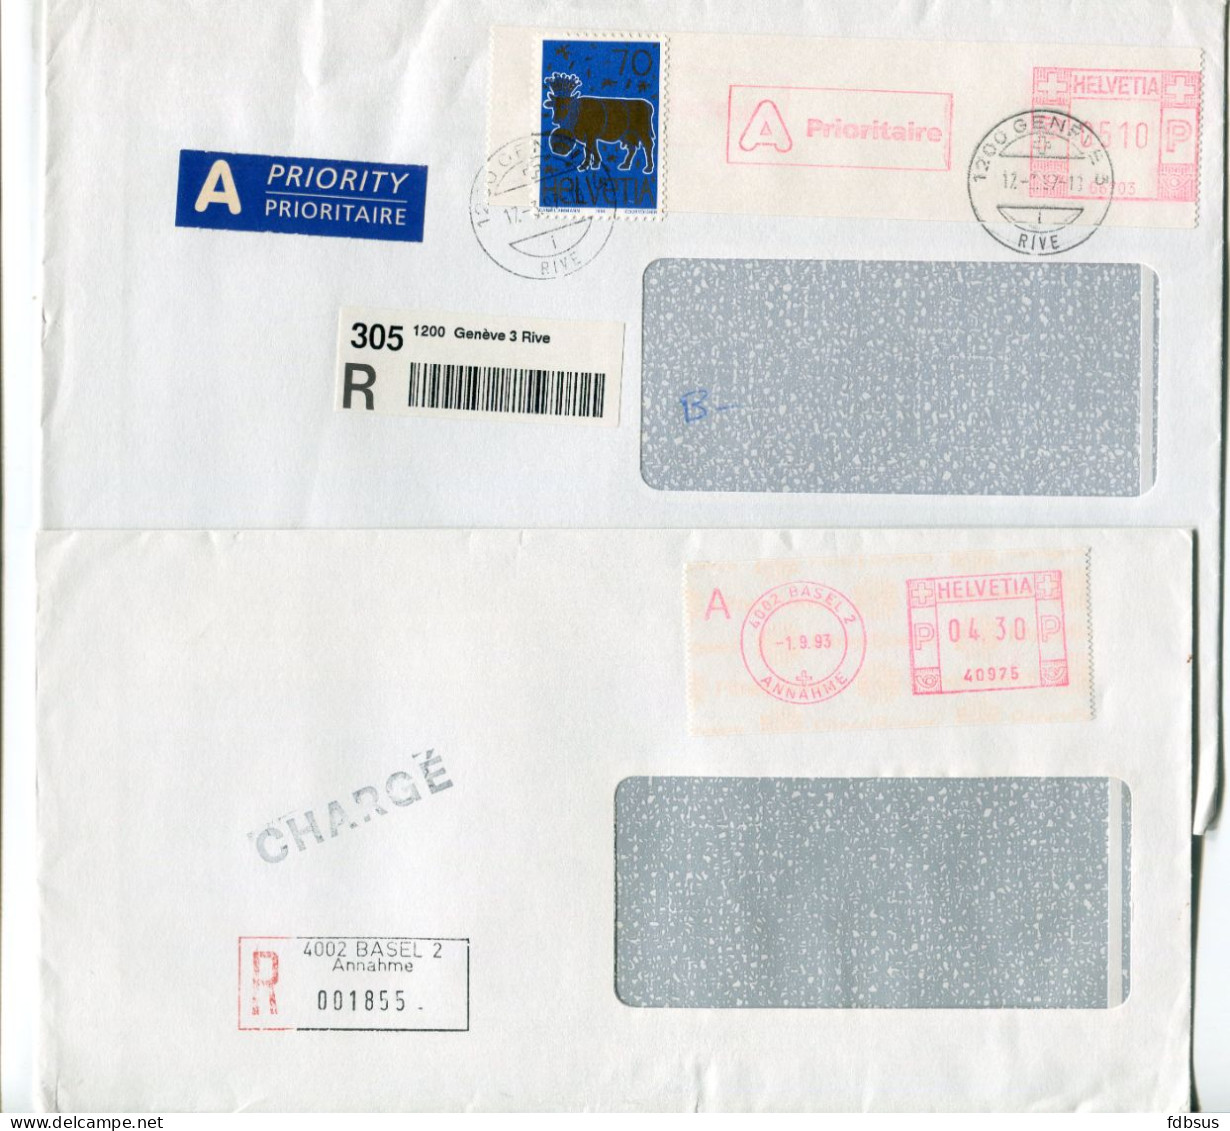 3 R-covers With Red Machine Cancellations - Muttenz I - 4002 Basel 2 - 1200 Genève 3 Rive - Automatic Stamps